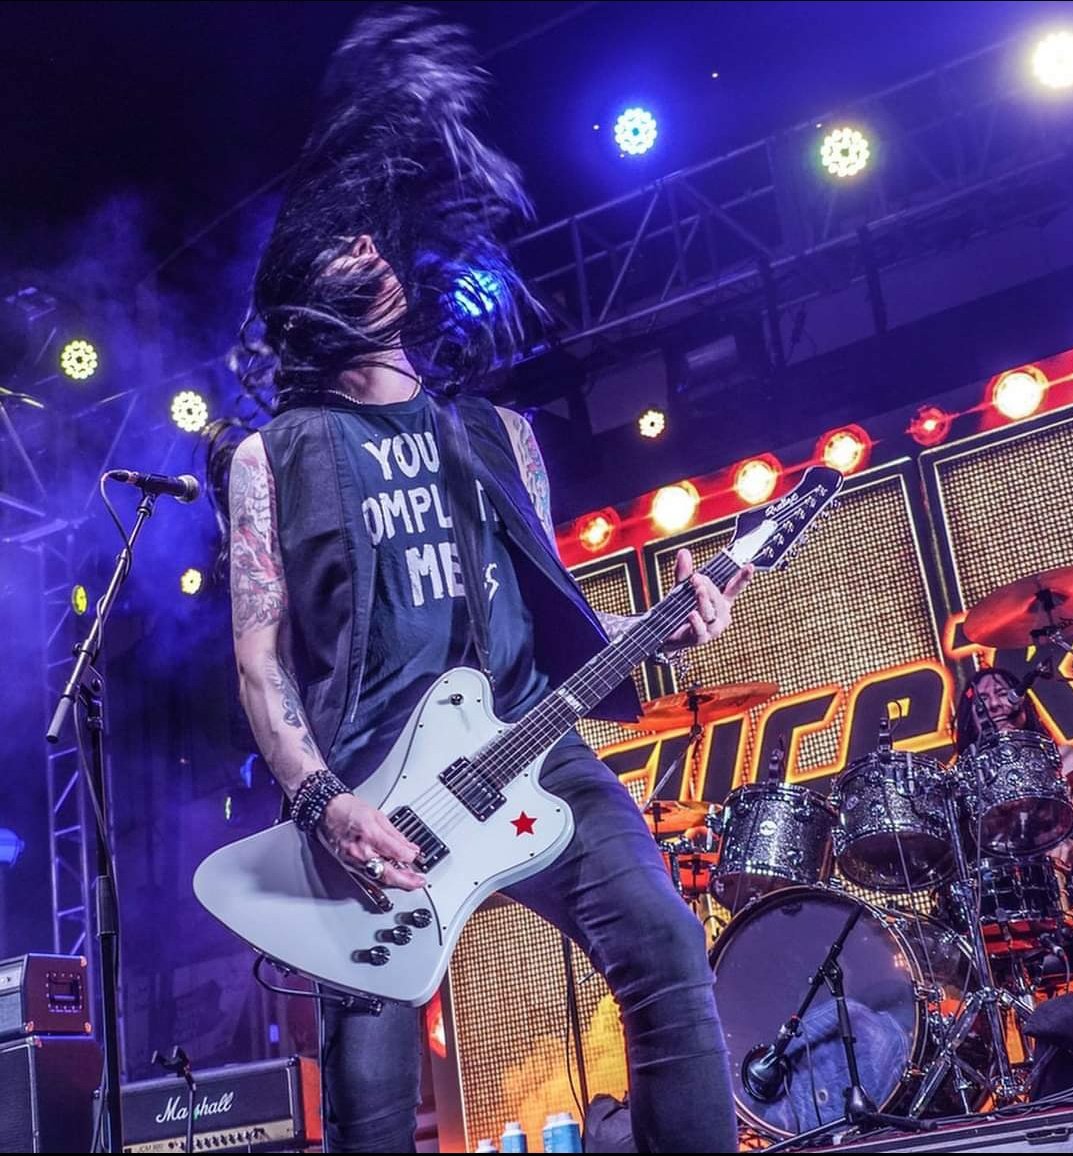 Amazing pic of Todd  @todddammitkerns jamming at a 2021 KISS Kruise X show, aboard Norwegian Gem in Miami Florida 🎤🎶🎸 
Credit photo owner📷
#ToddKerns #Superstar #KISS #musicmonday